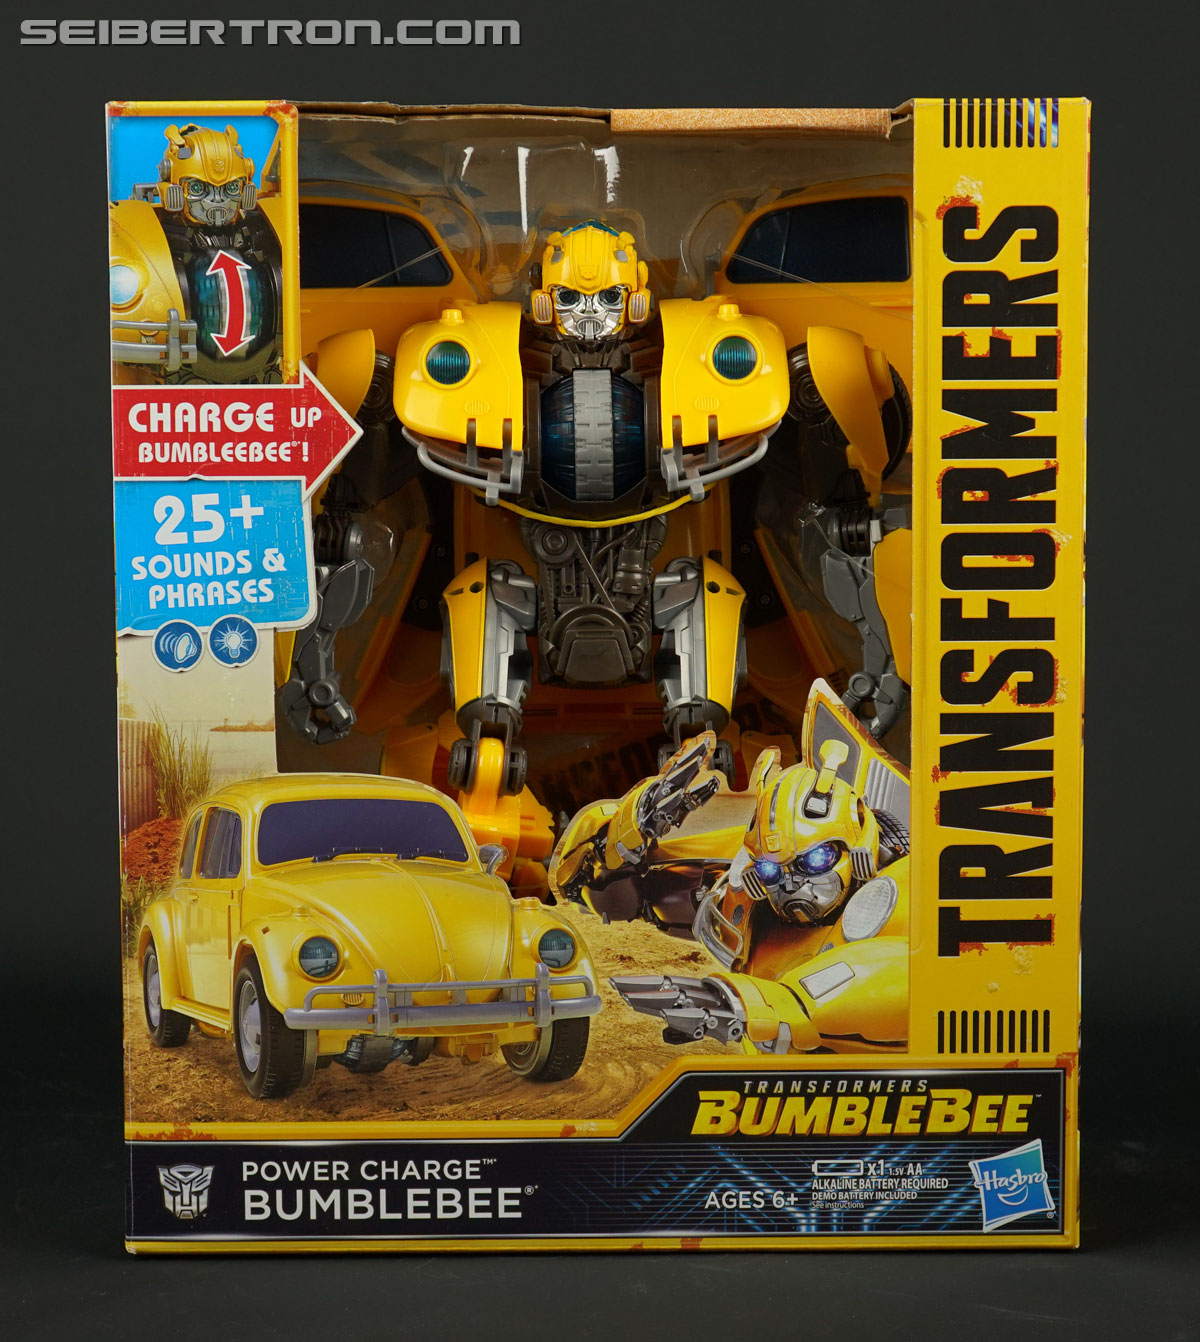 Bumblebee Movie Toys Unboxing #JoinTheBuzz